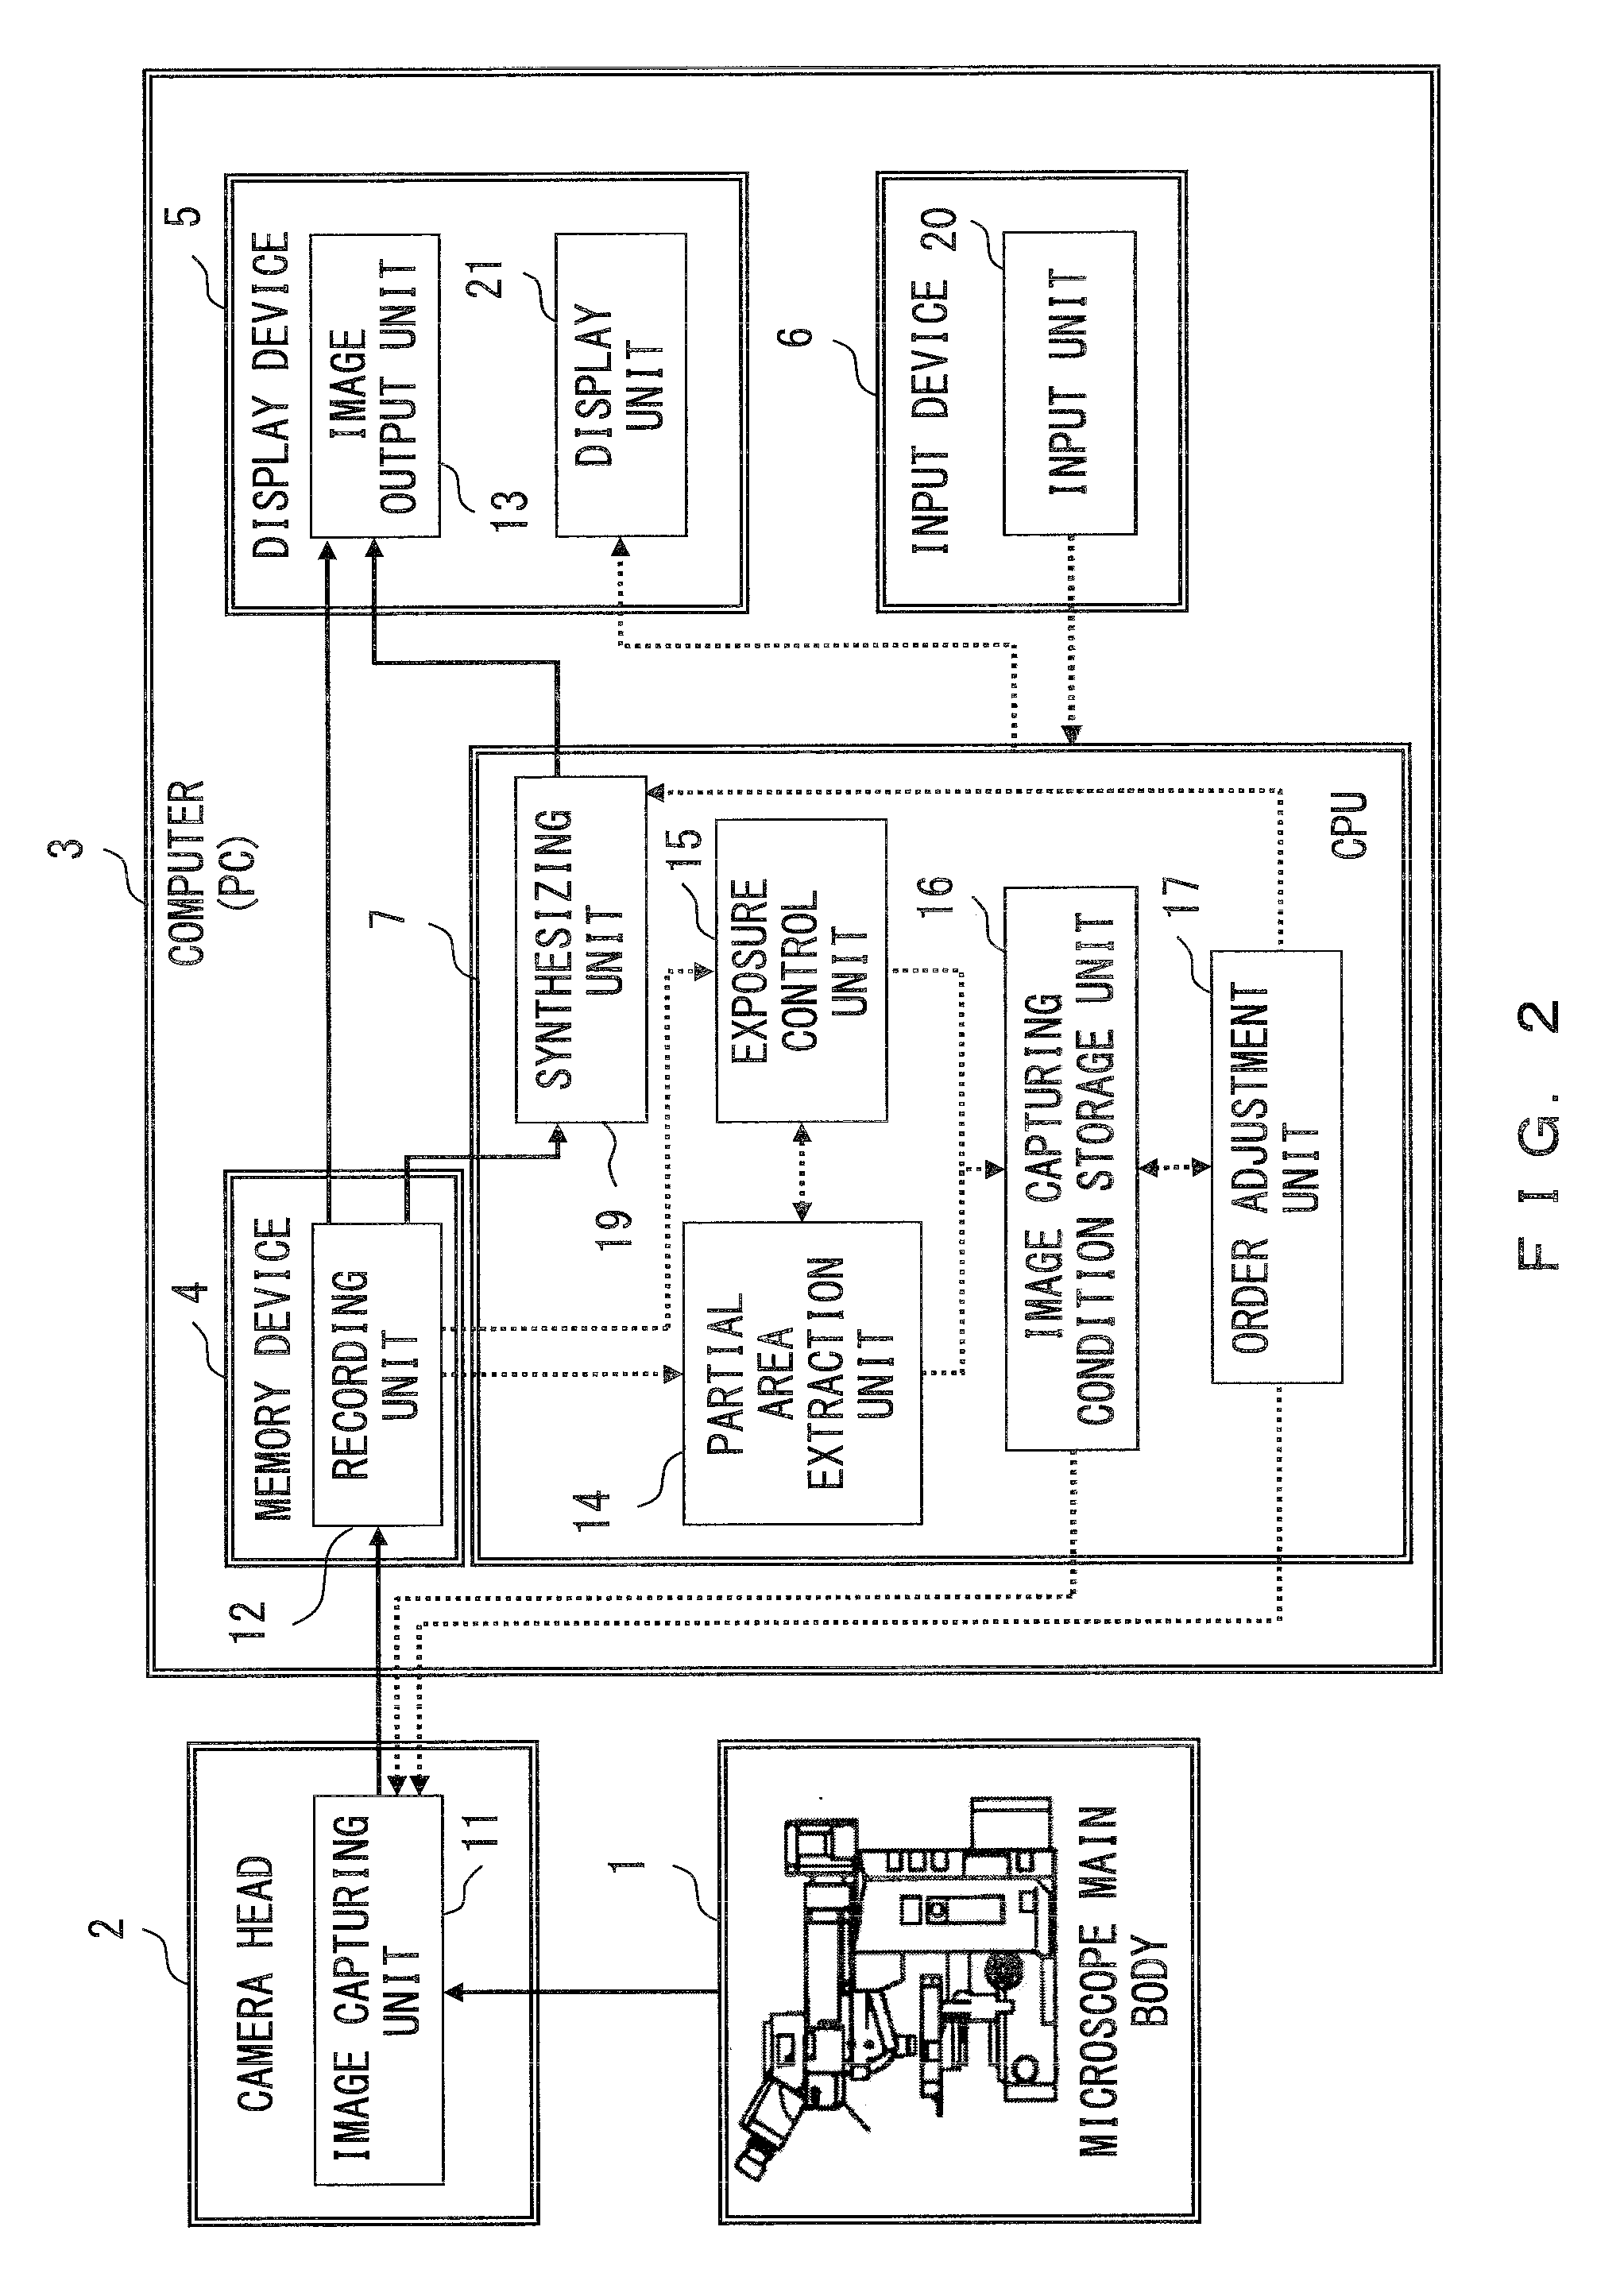 Image obtaining apparatus, image synthesis method and microscope system